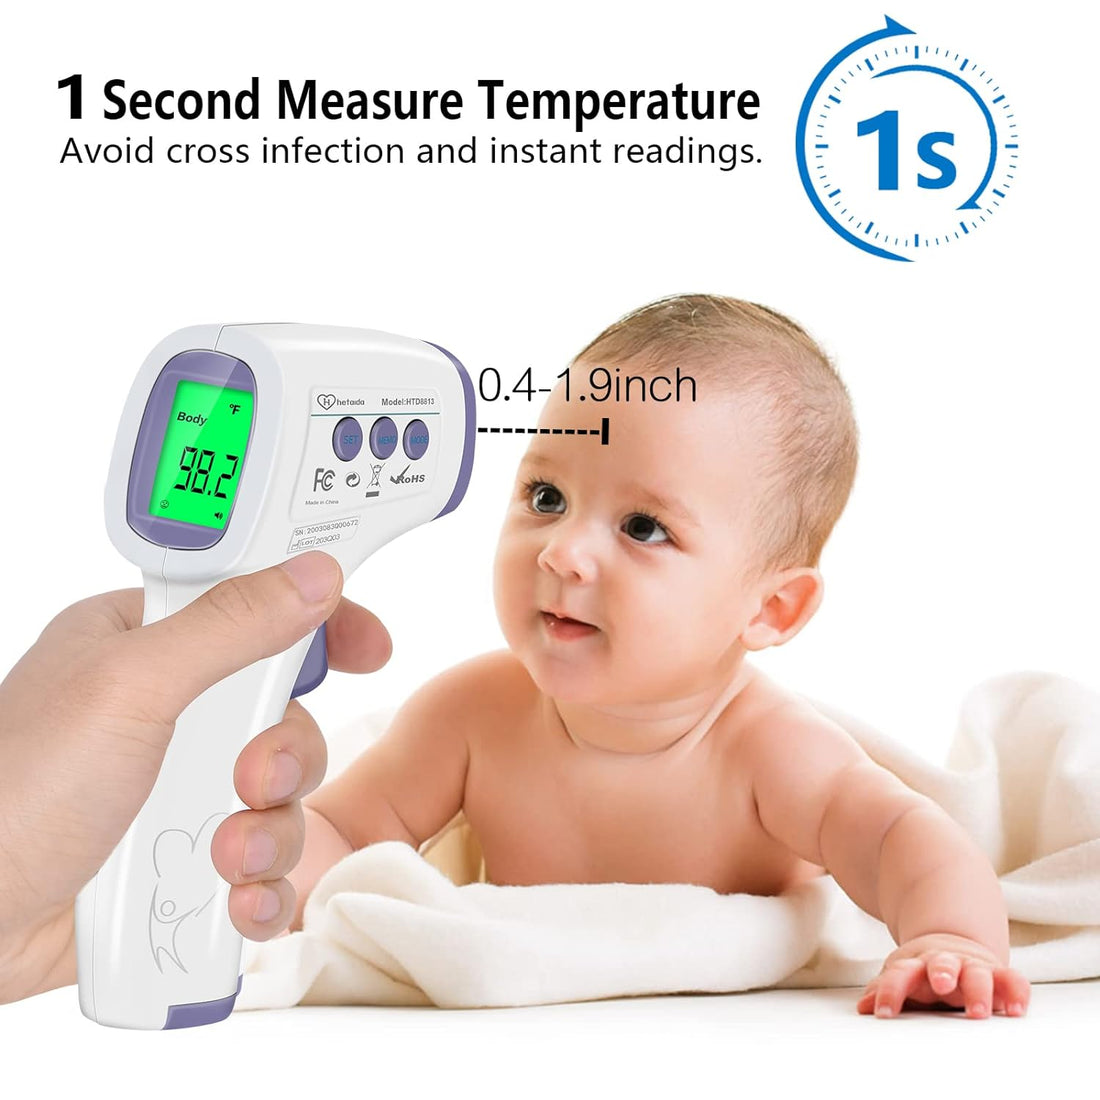 Thermometer for Adults Forehead, No Touch Thermometer for Adults, Forehead Thermometer, Instant Reading, Medical Grade, Good for Baby Food, Bath,Milk (Purple)